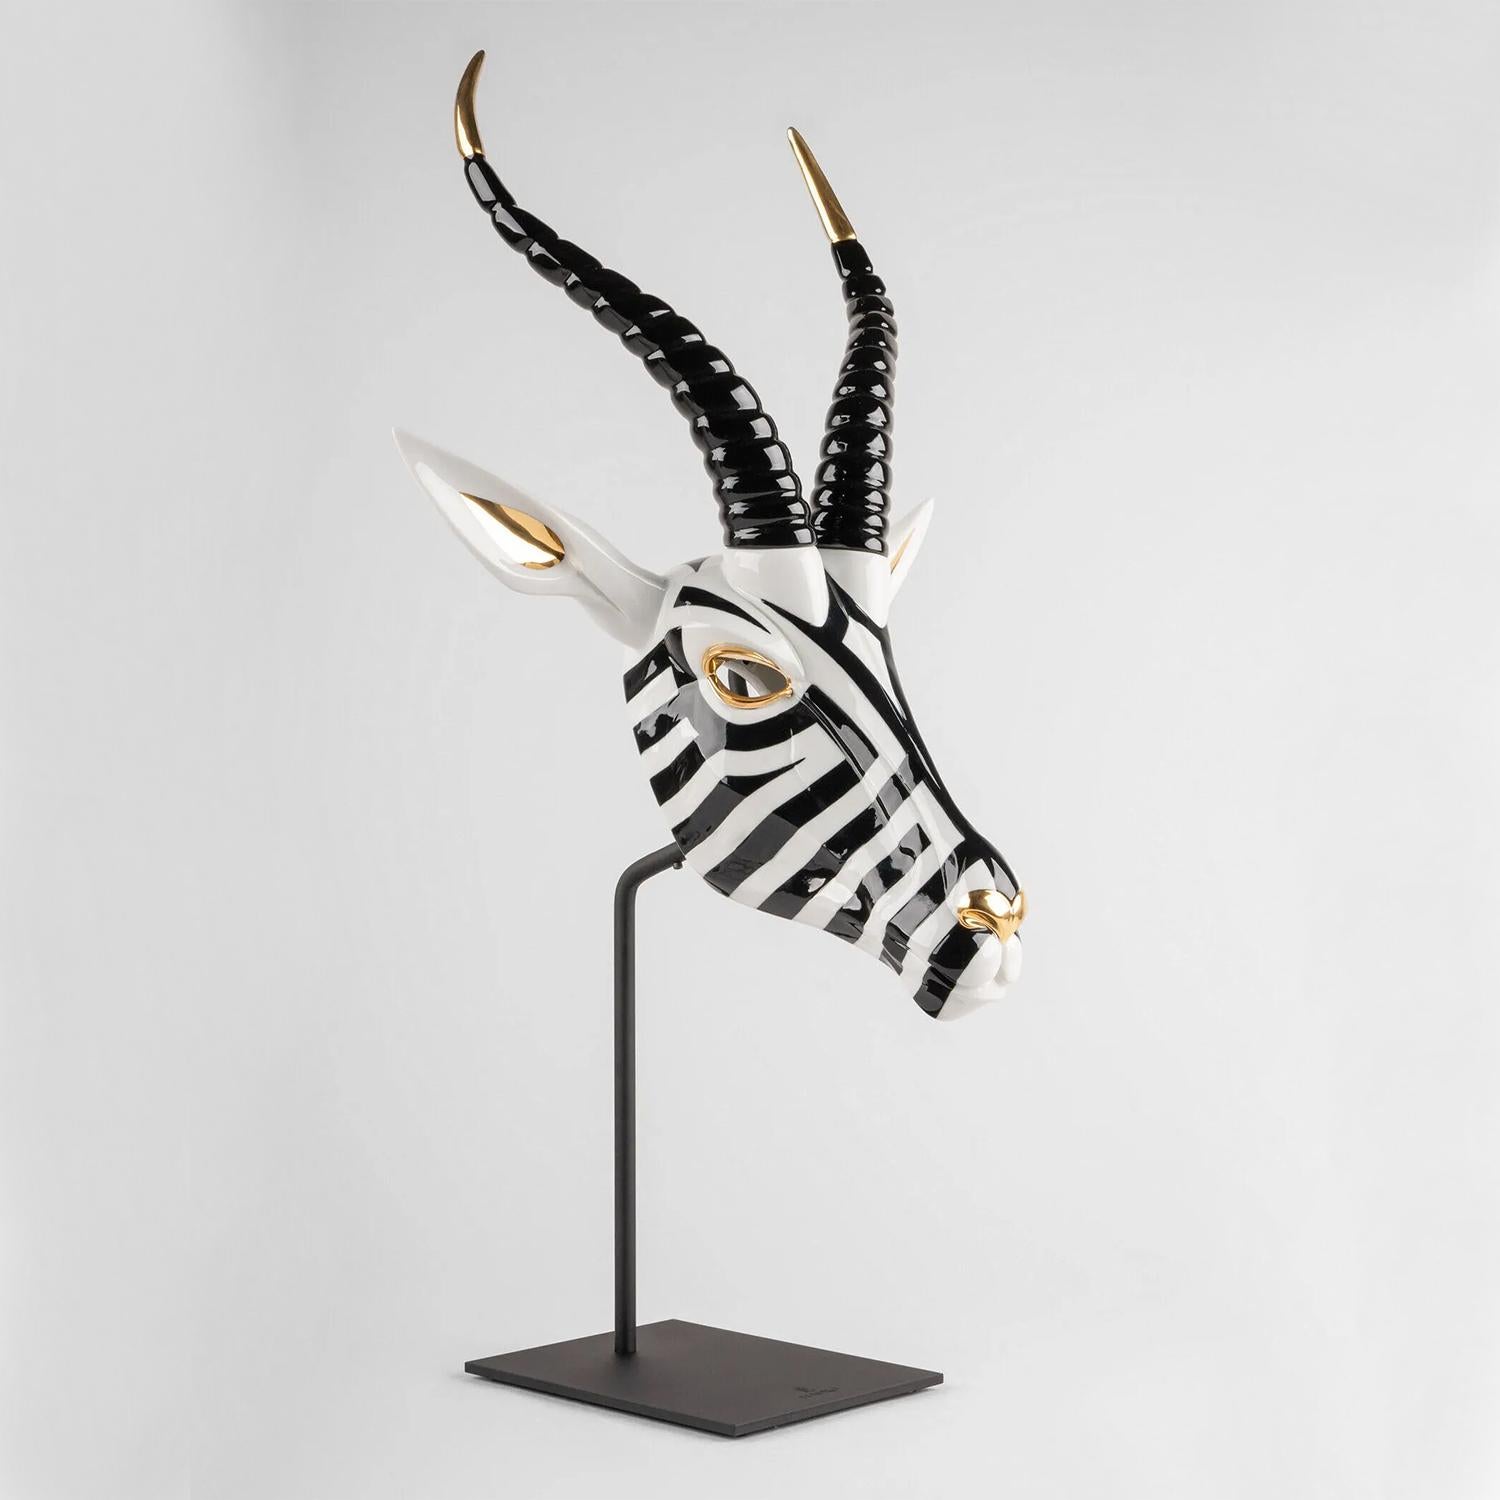 Sculpture Springbok Head with all structure in 
porcelain in black and white and shiny gold finish.
On metal base.